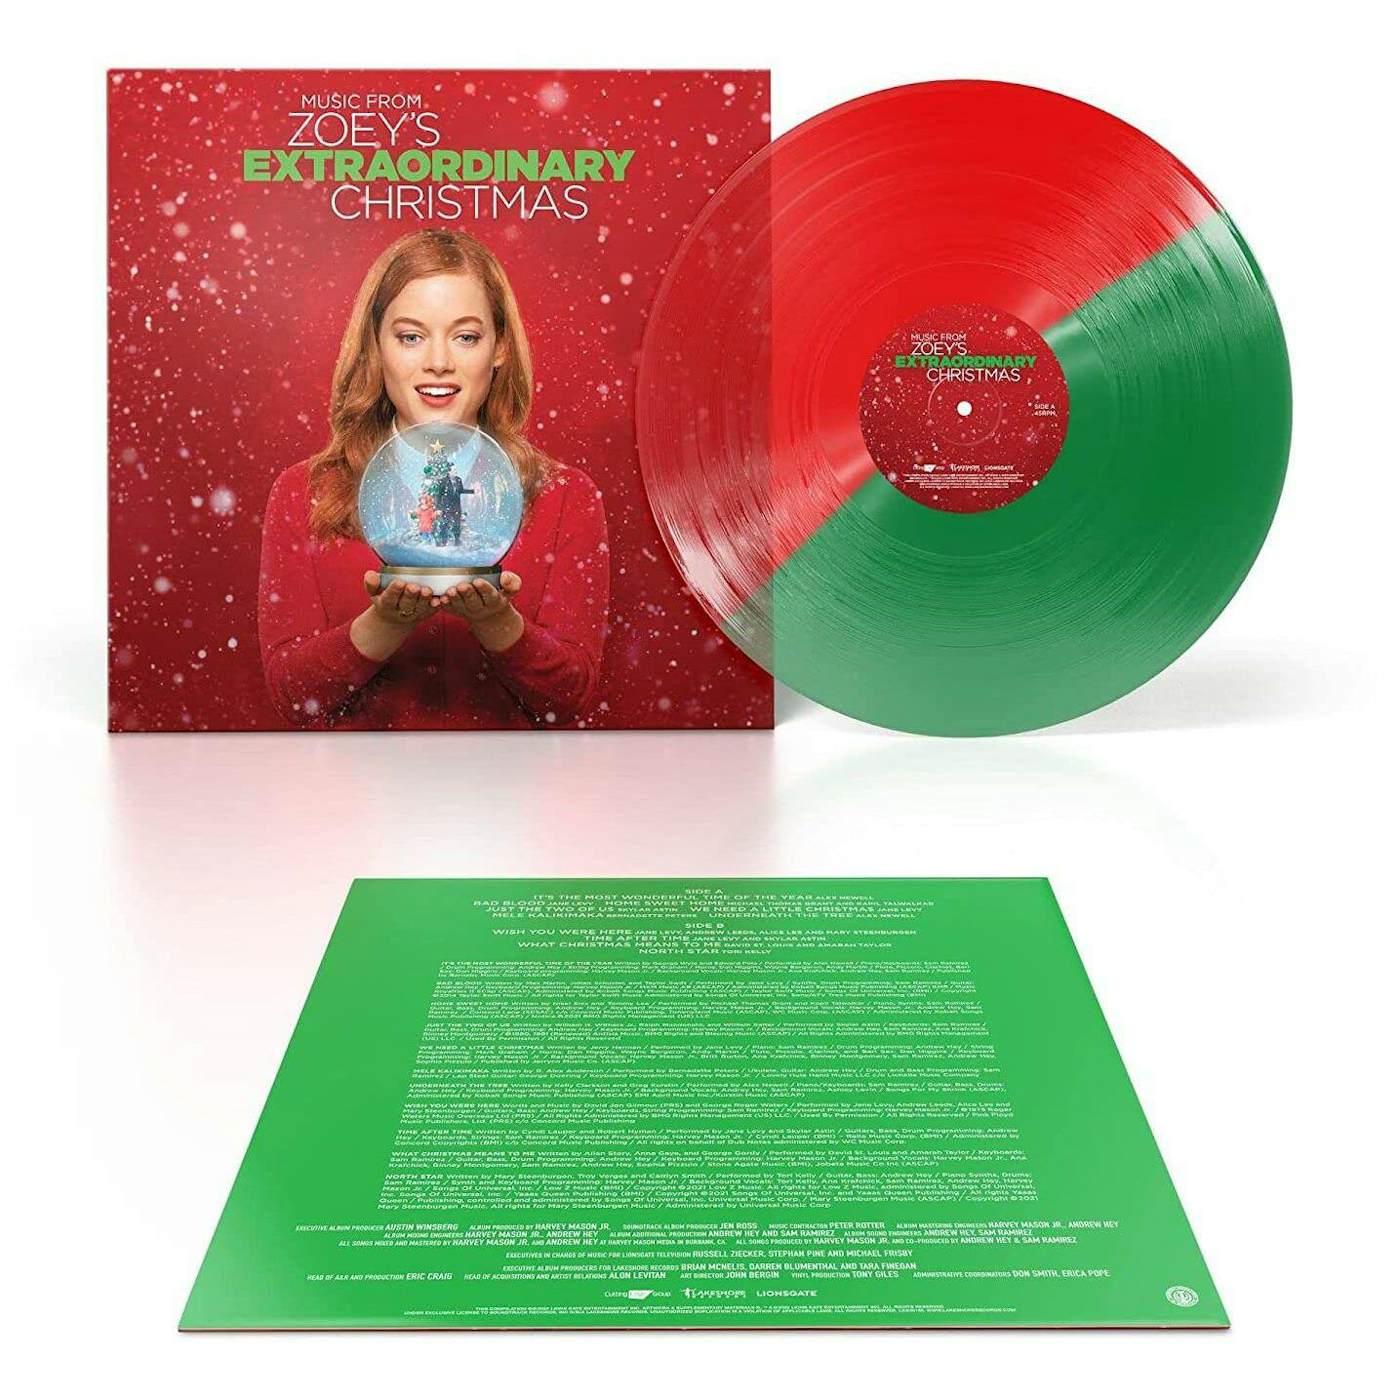 Tori Kelly Music From Zoey’s Extraordinary Christmas Original Soundtrack (Tran Red/Green Split Christmas Cookie) Vinyl Record